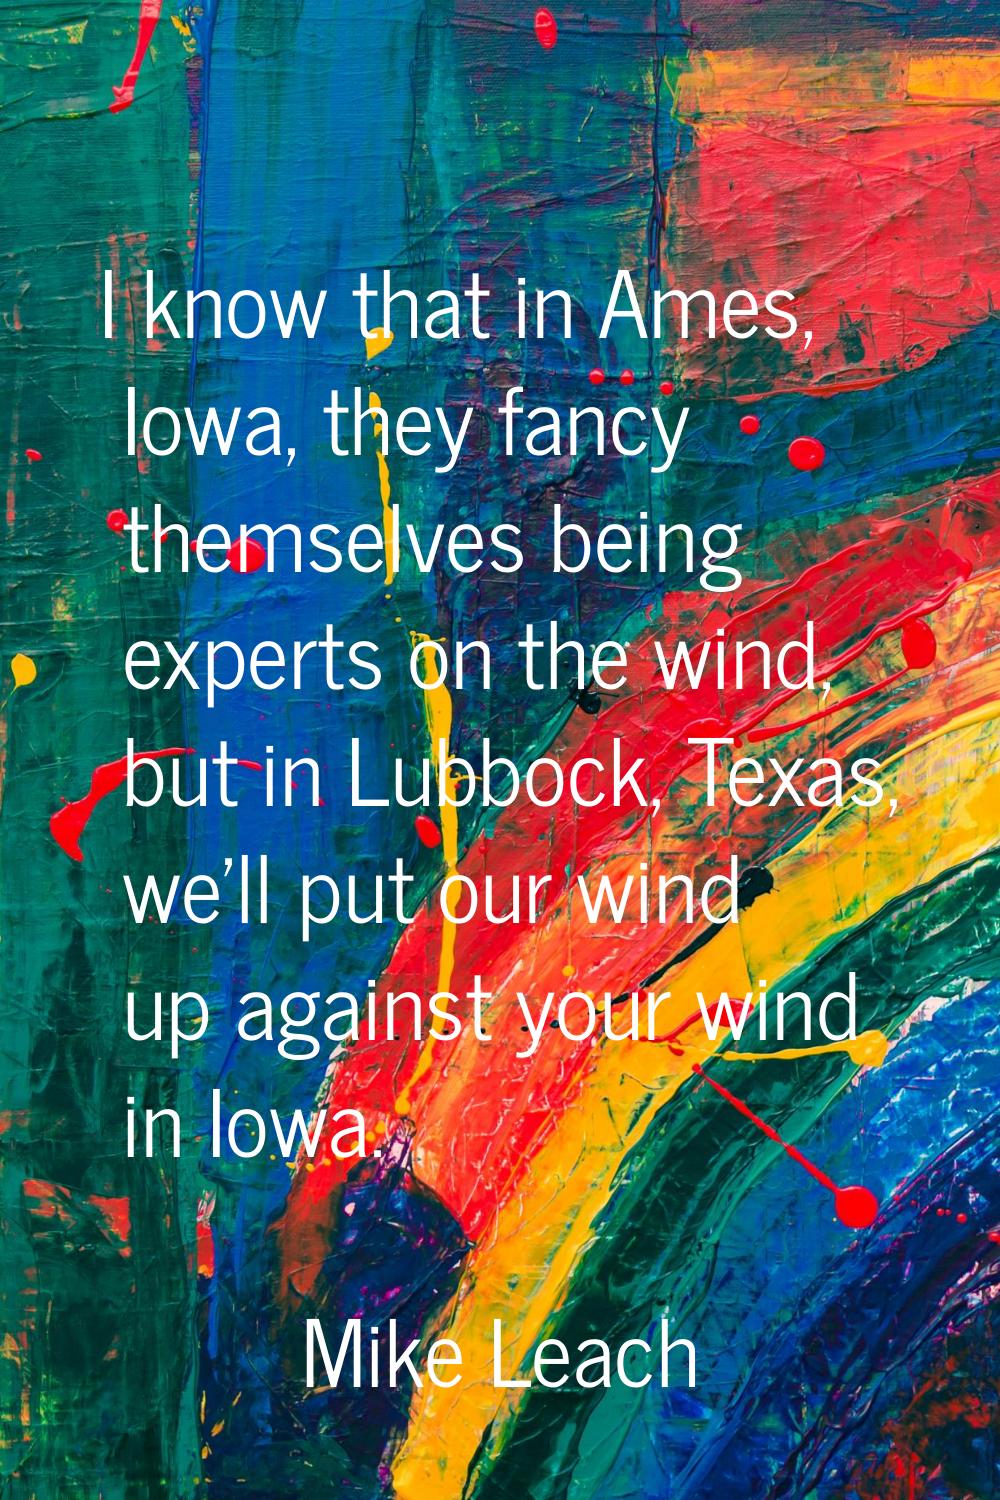 I know that in Ames, Iowa, they fancy themselves being experts on the wind, but in Lubbock, Texas, 